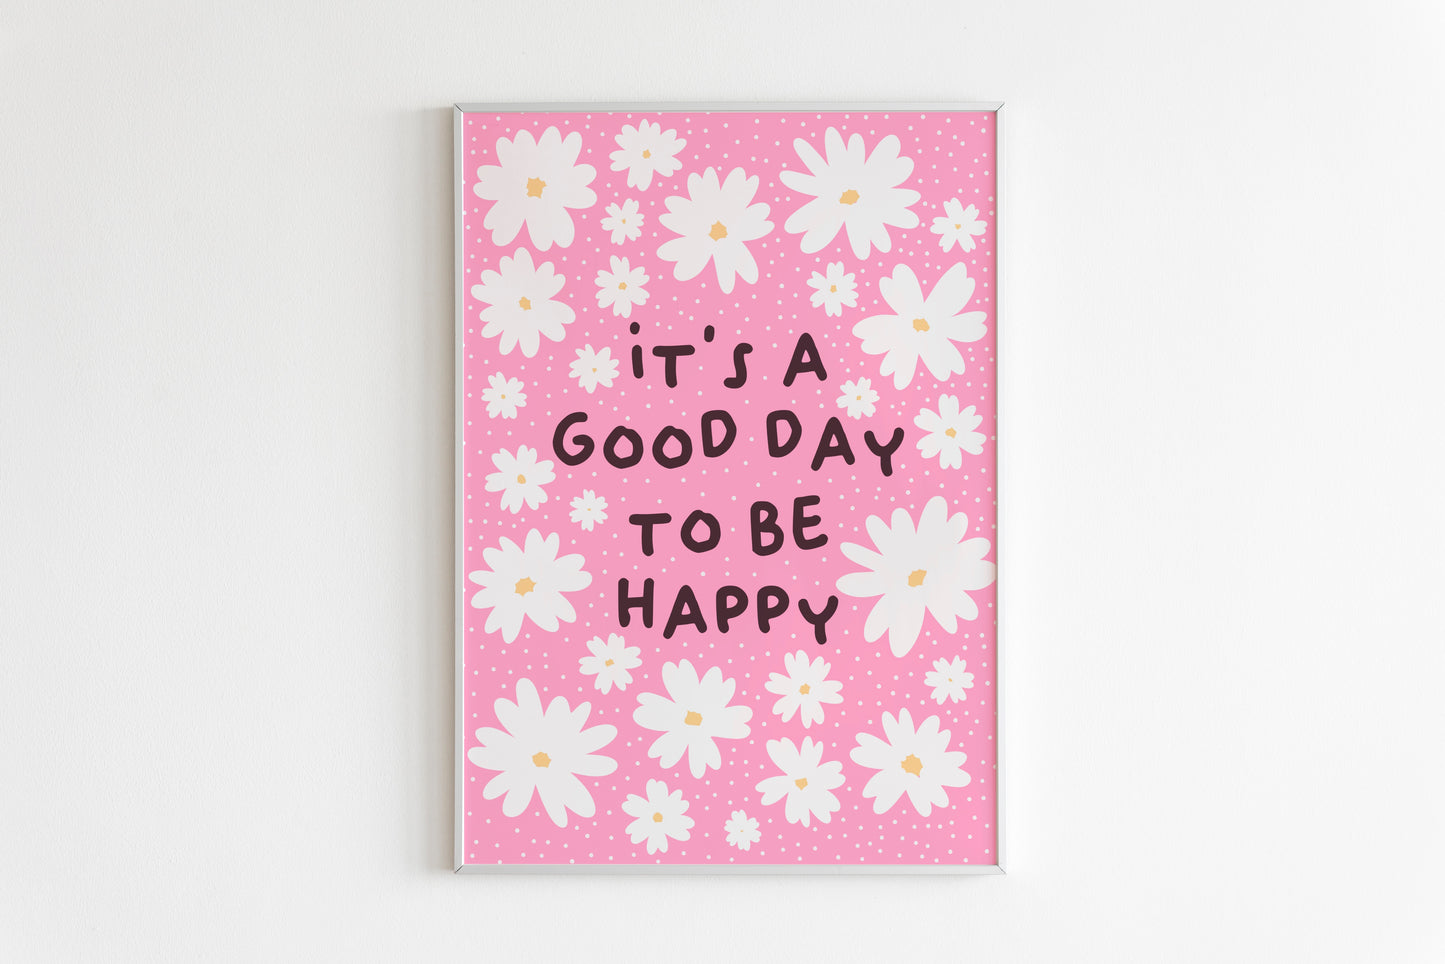 It's A Good Day To Be Happy Print in Pink